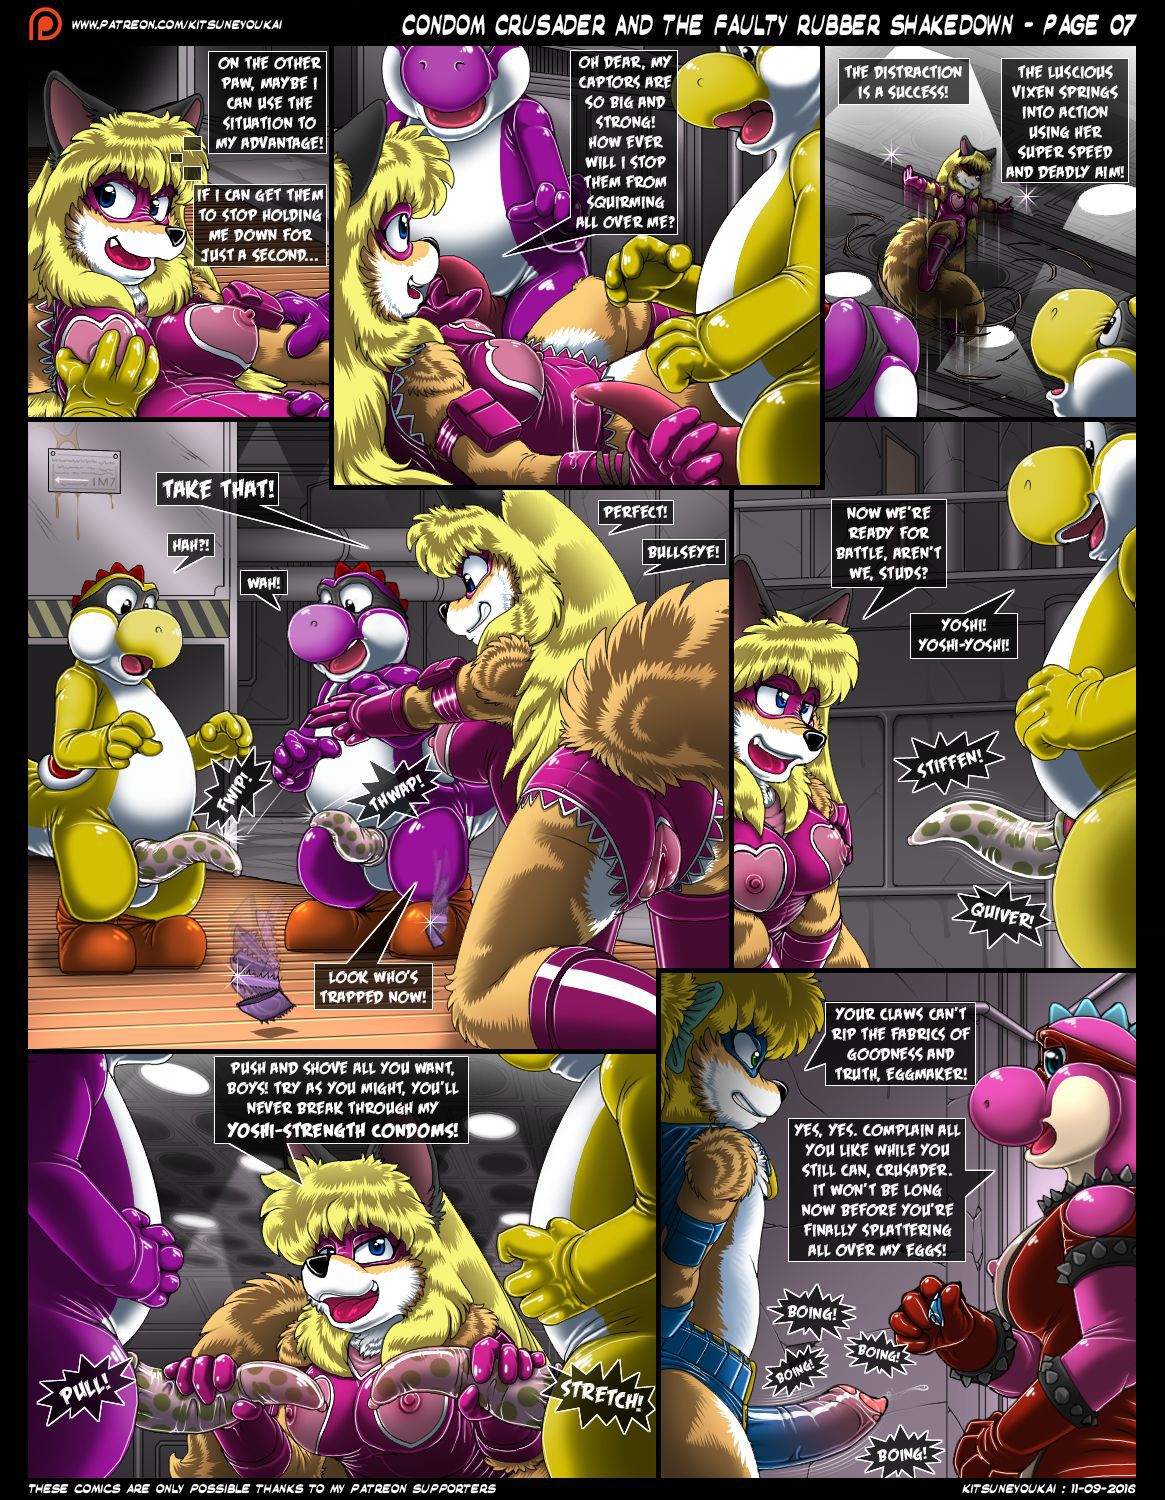 Condom Crusader And The Faulty Rubber Shakedown by Kitsune Youkai (Ongoing) 7